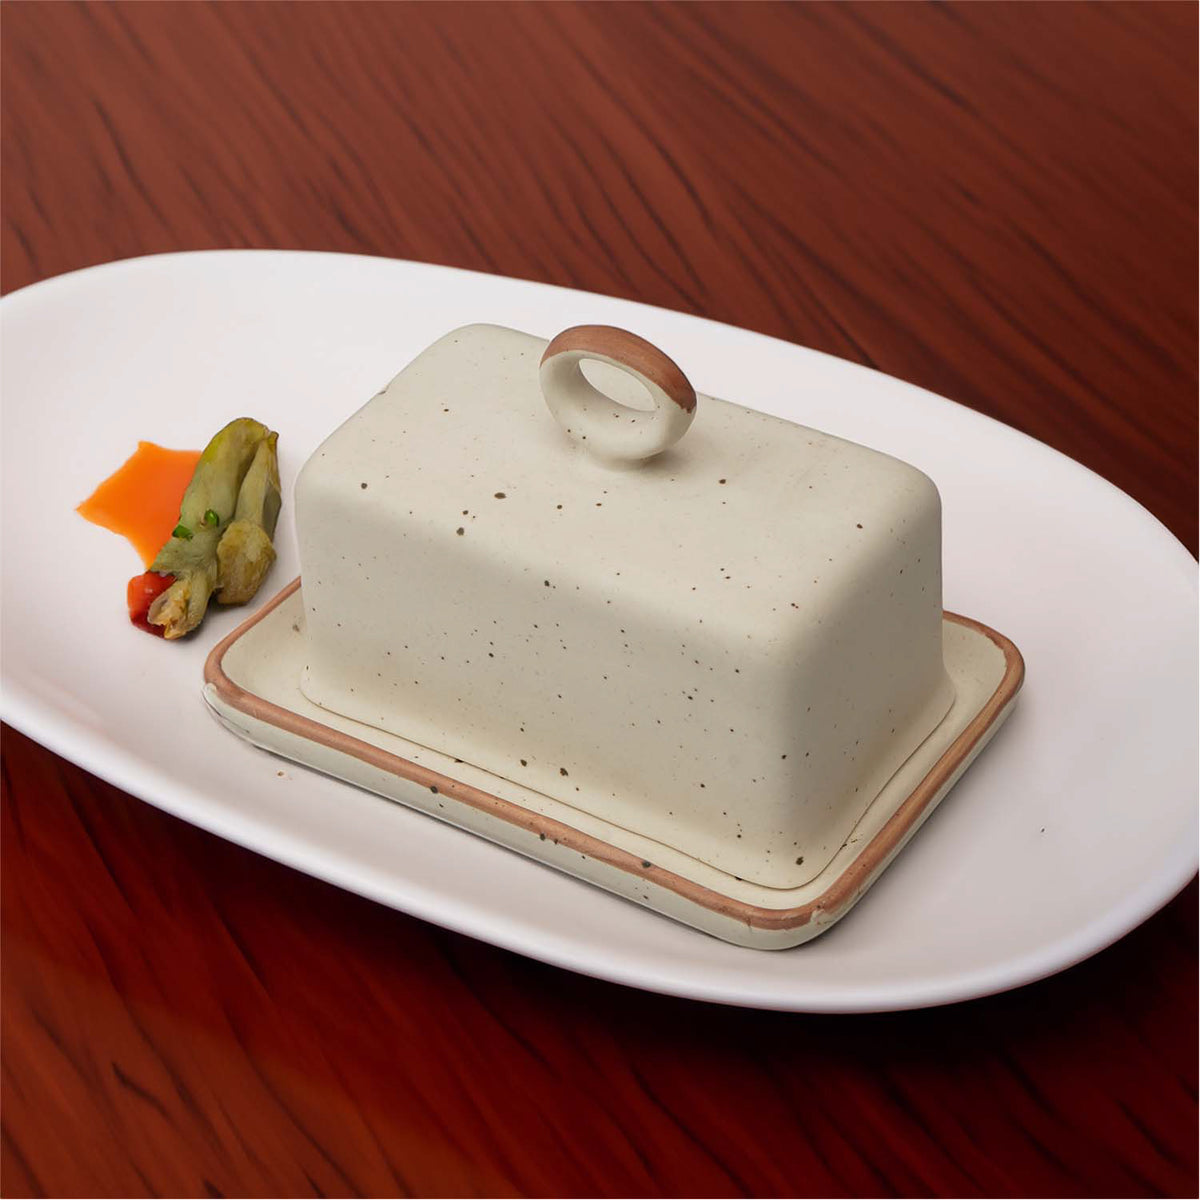 Claymistry Ceramic Dinner & Snacks Ivory with Brown Borders Serving Tray | 20cm * 13cm * 14cm | Matte | Dishwasher, Oven & Microwave Safe | Butter, Cheese, Fish, Dish Tray | Premium Kitchen Crockery